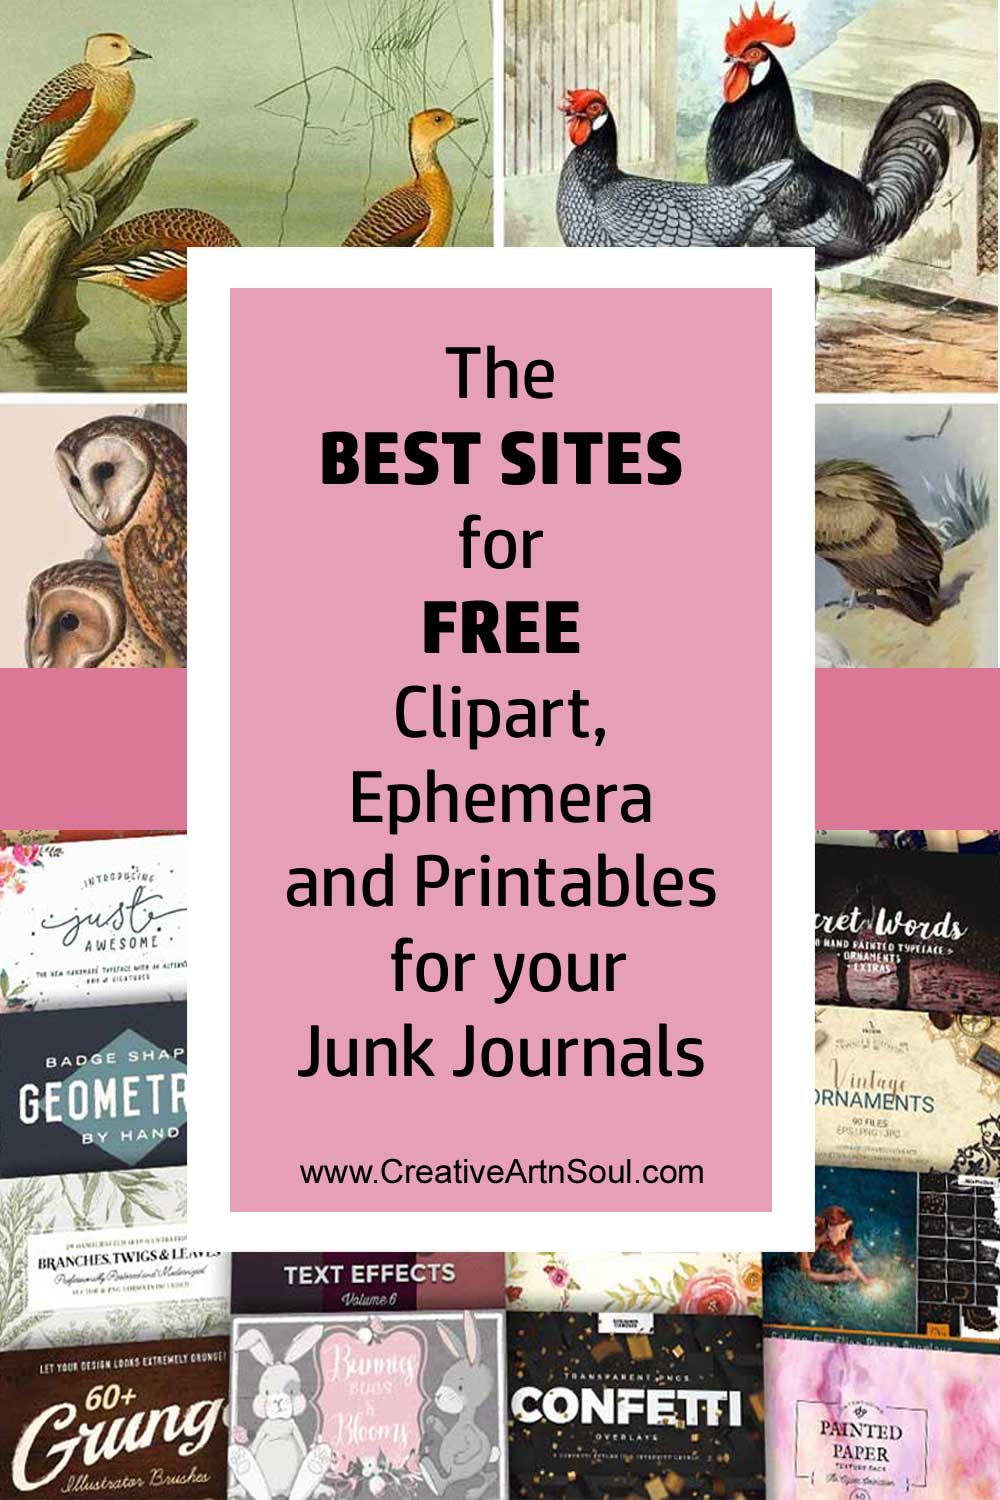 Best Sites for Free Clipart, Ephemera and Printables for your Junk Journals and Art Journals